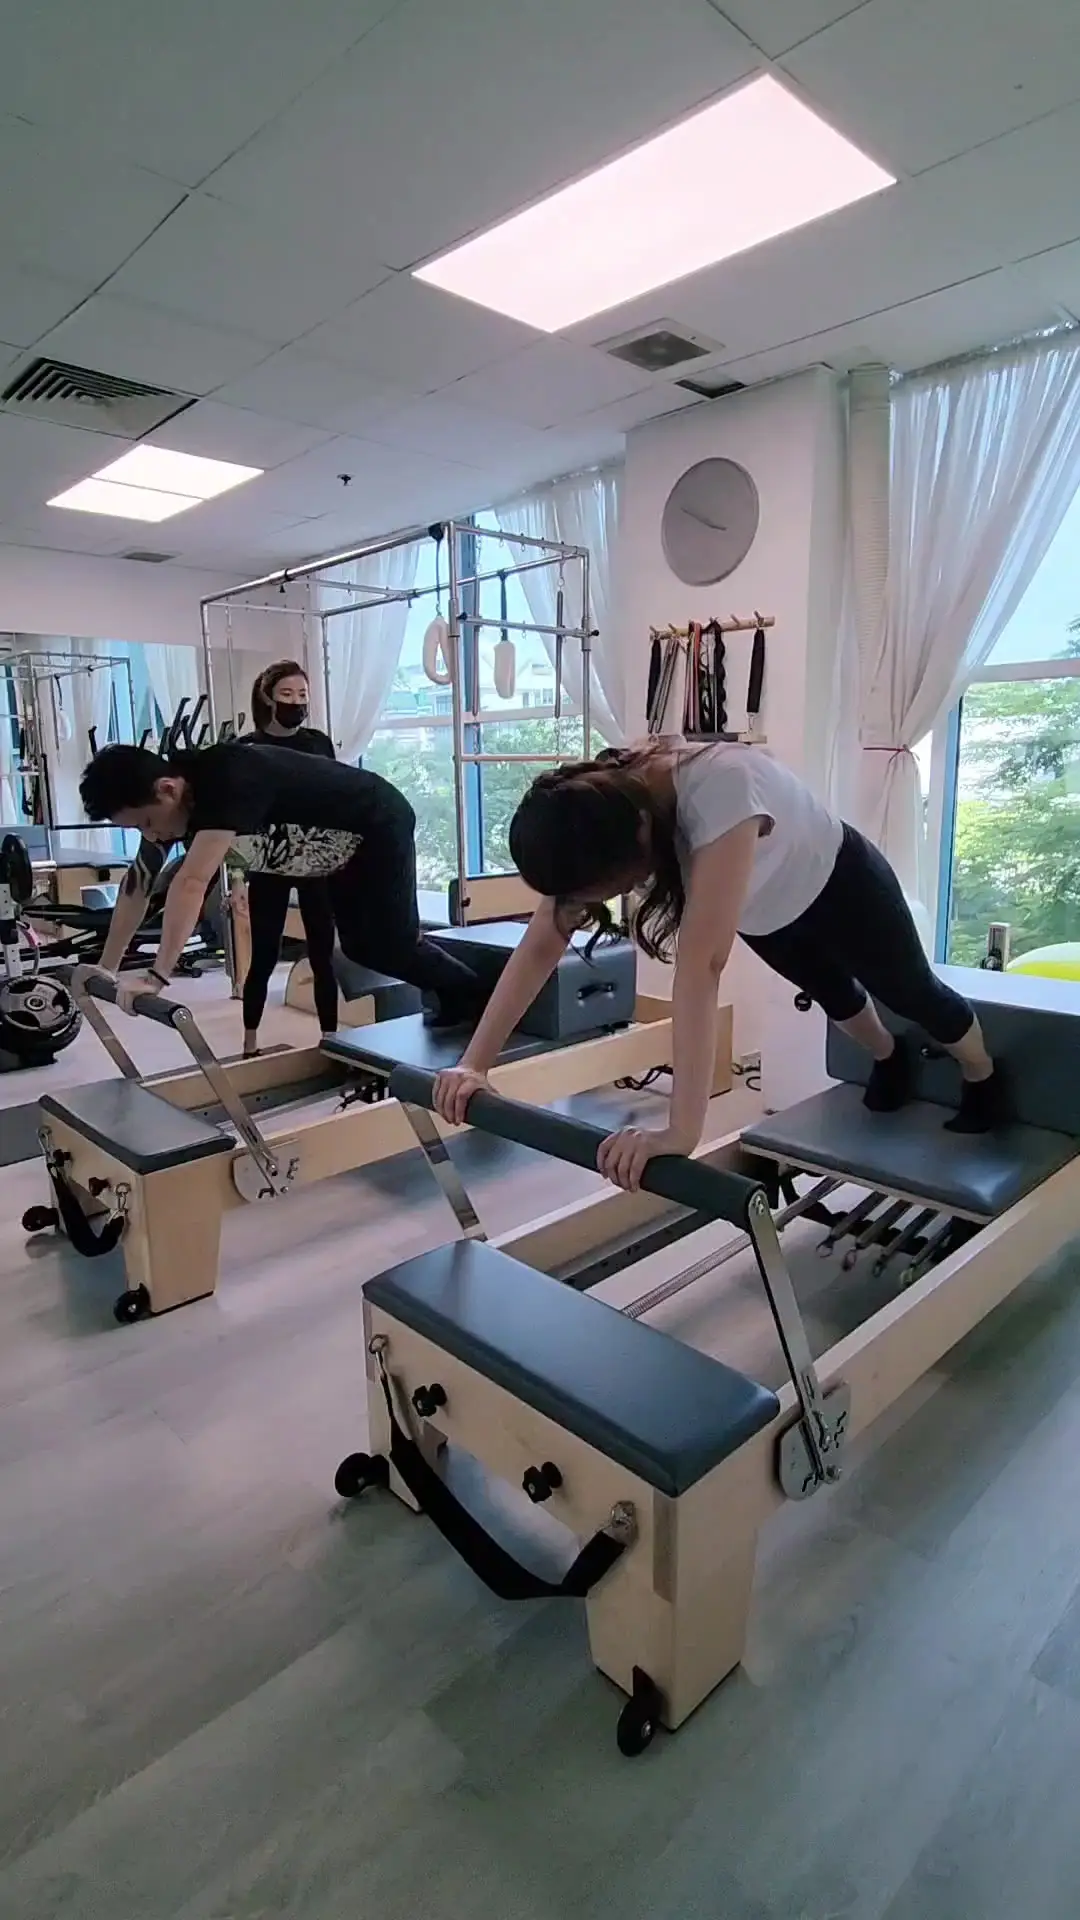 Pilates Projects: Up Stretch on the Reformer - Pilates Andrea